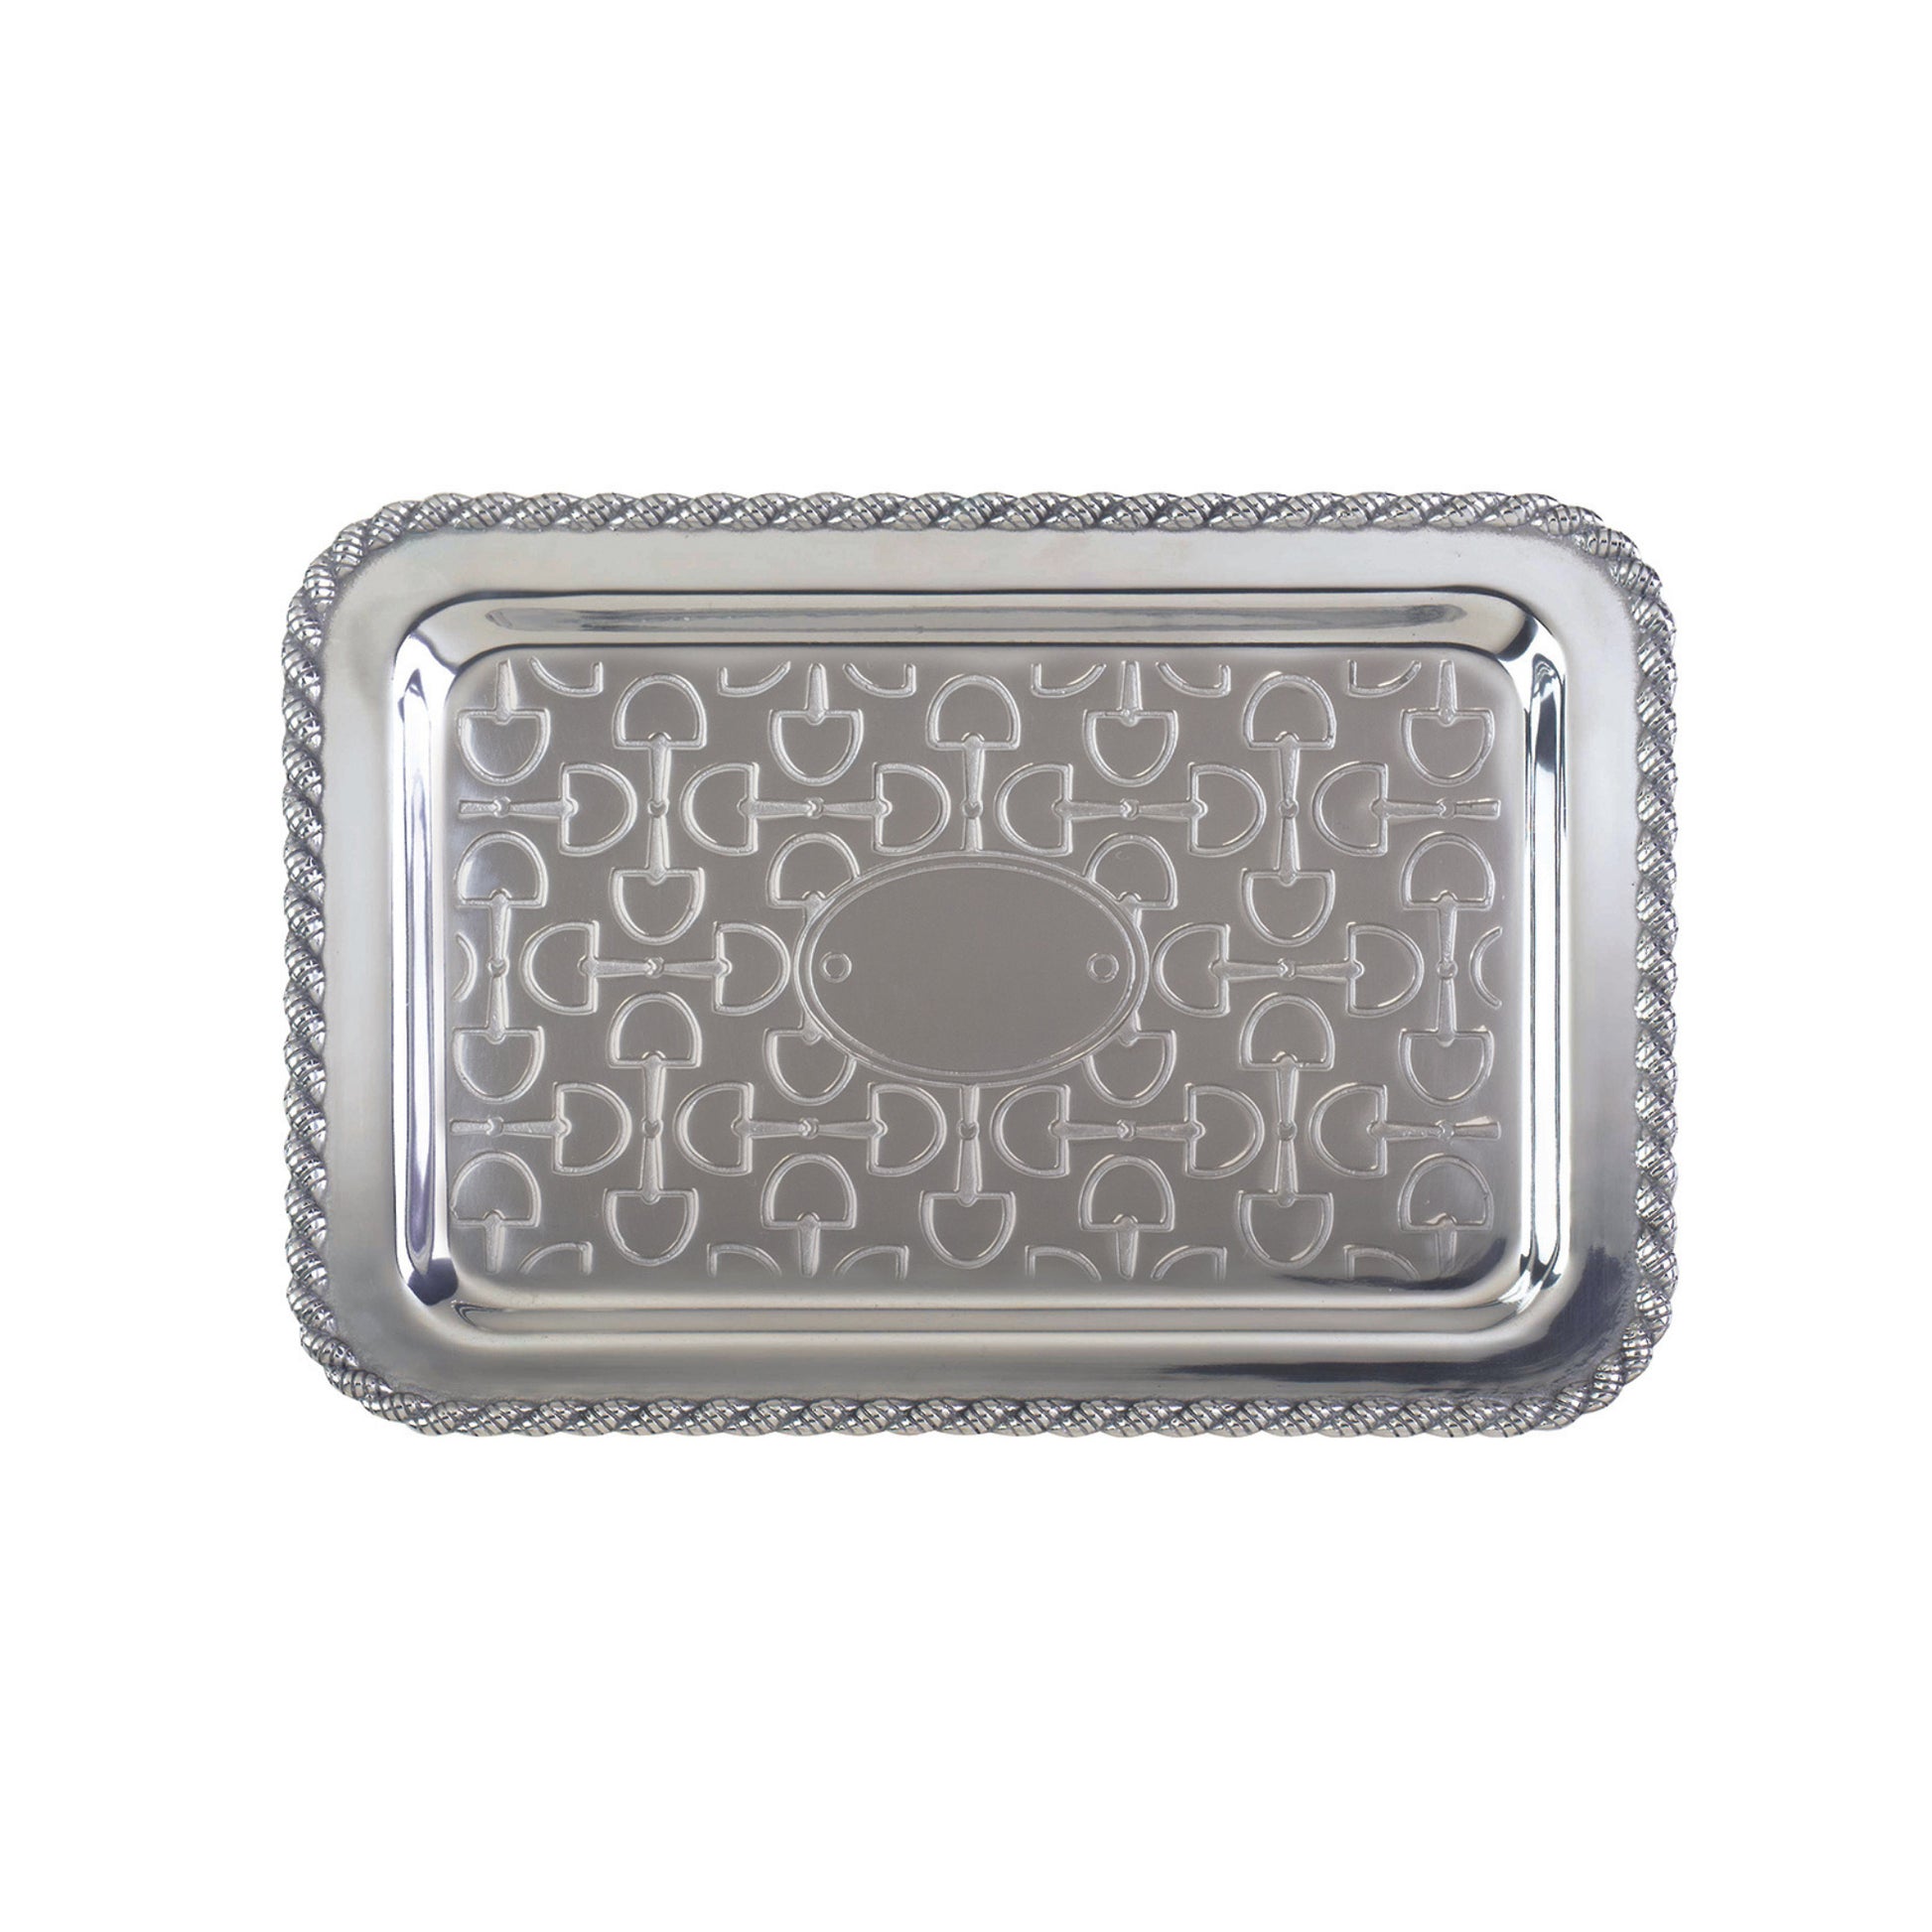 Derby Run Vanity Tray with engraving options - Templeton Silver